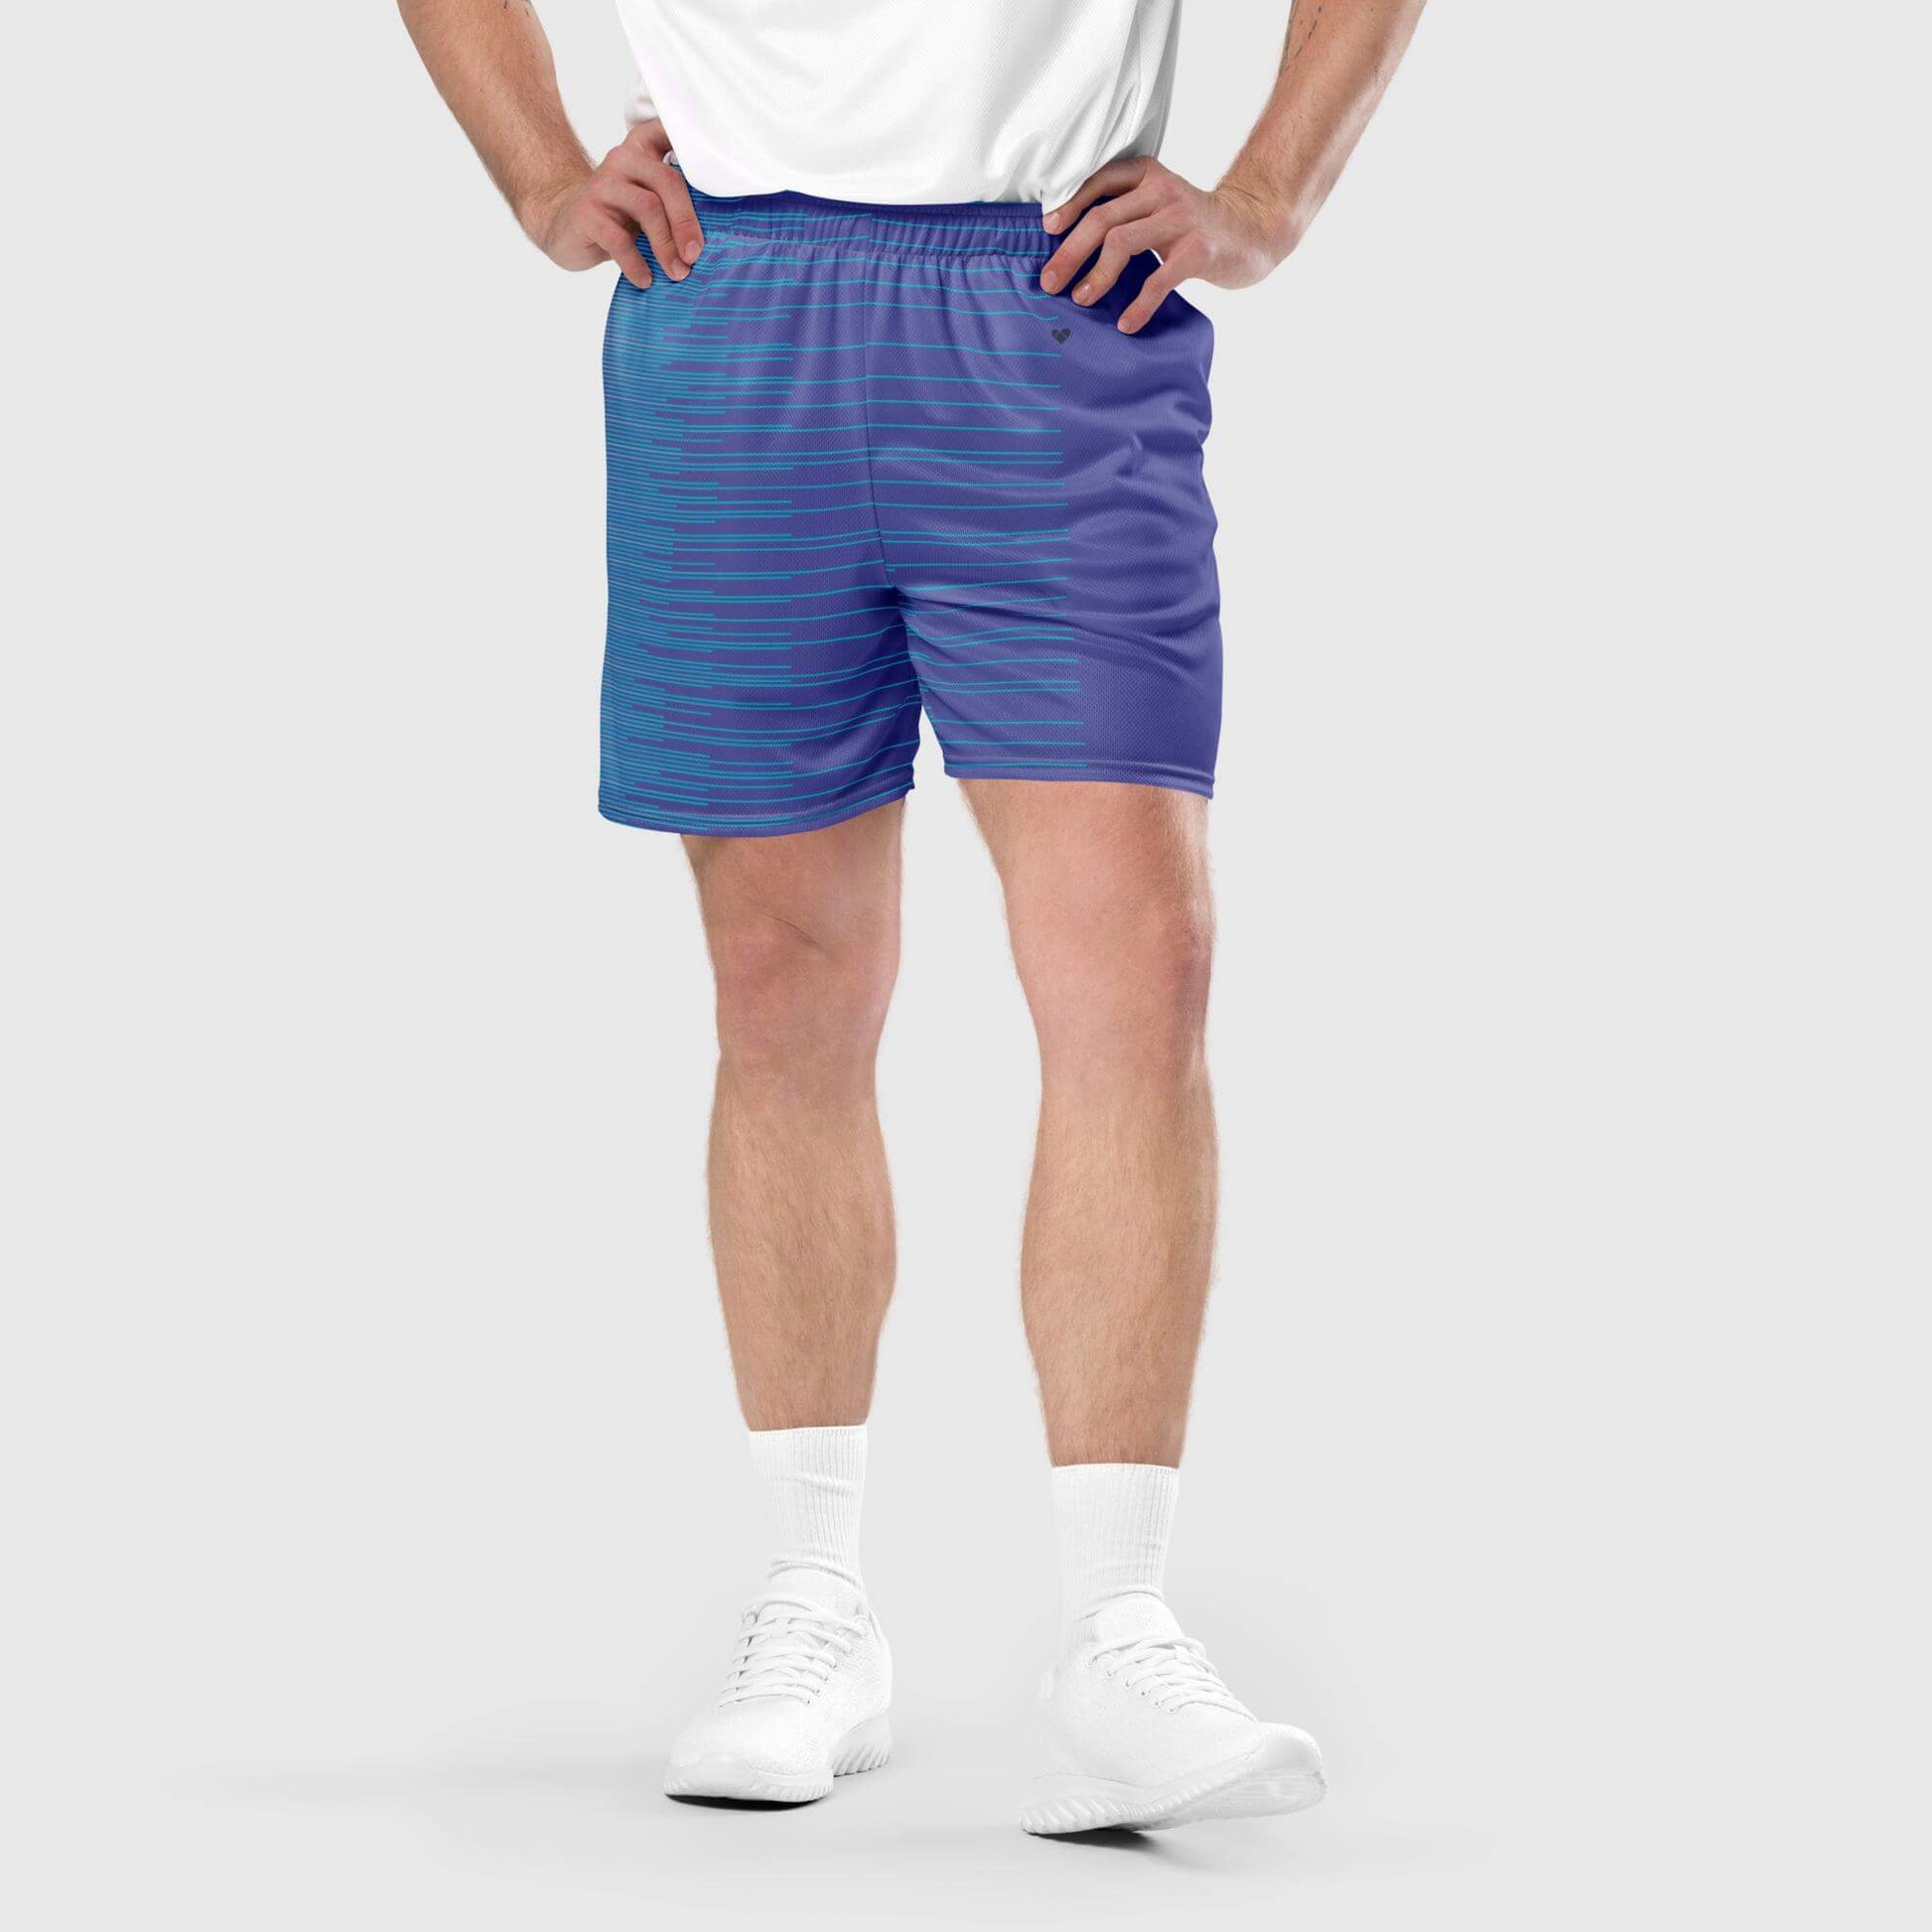 Limited edition Genderless Shorts for a unique fashion statement